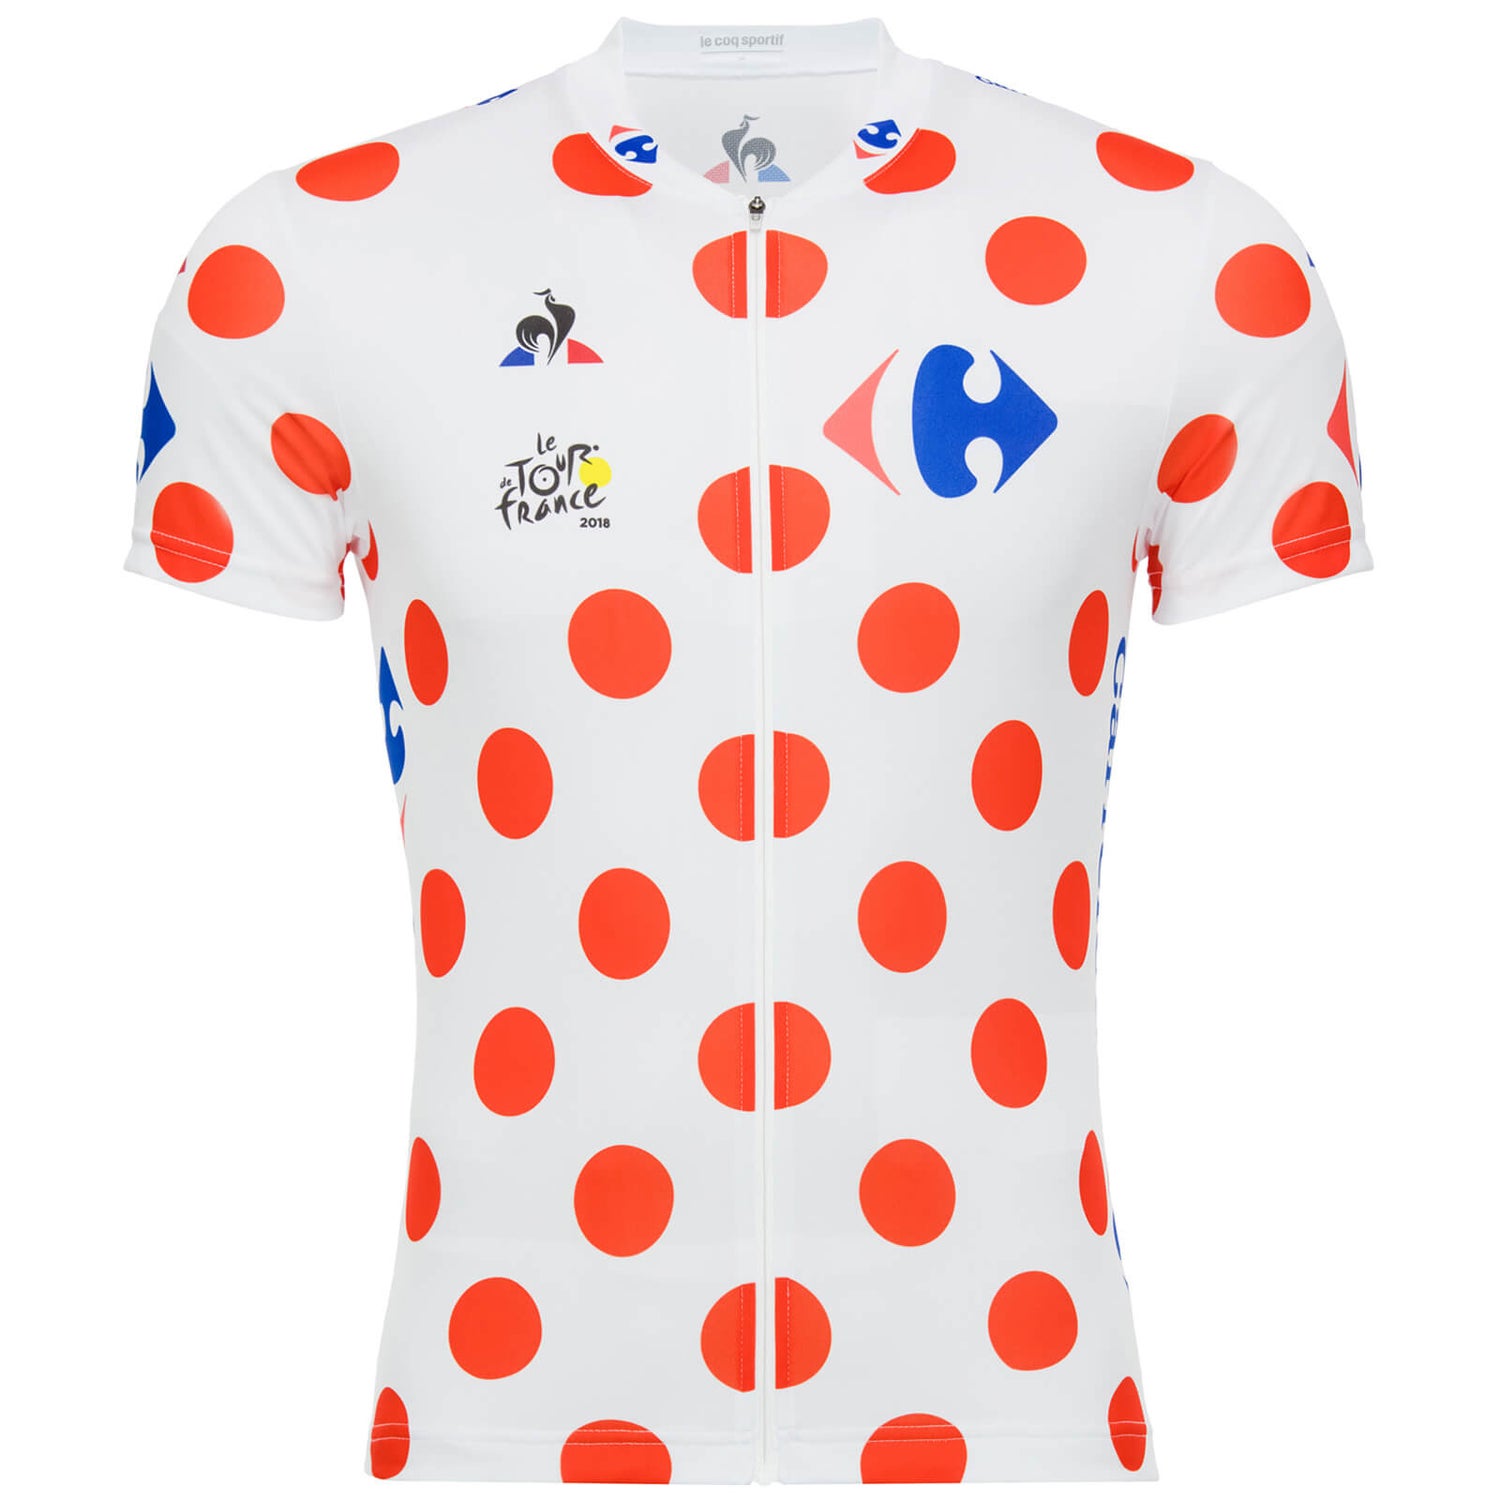 Mammoth Martin Luther King Junior Microbe Le Coq Sportif Tour de France 2018 King of the Mountains Official Jersey -  Red/White | ProBikeKit.com